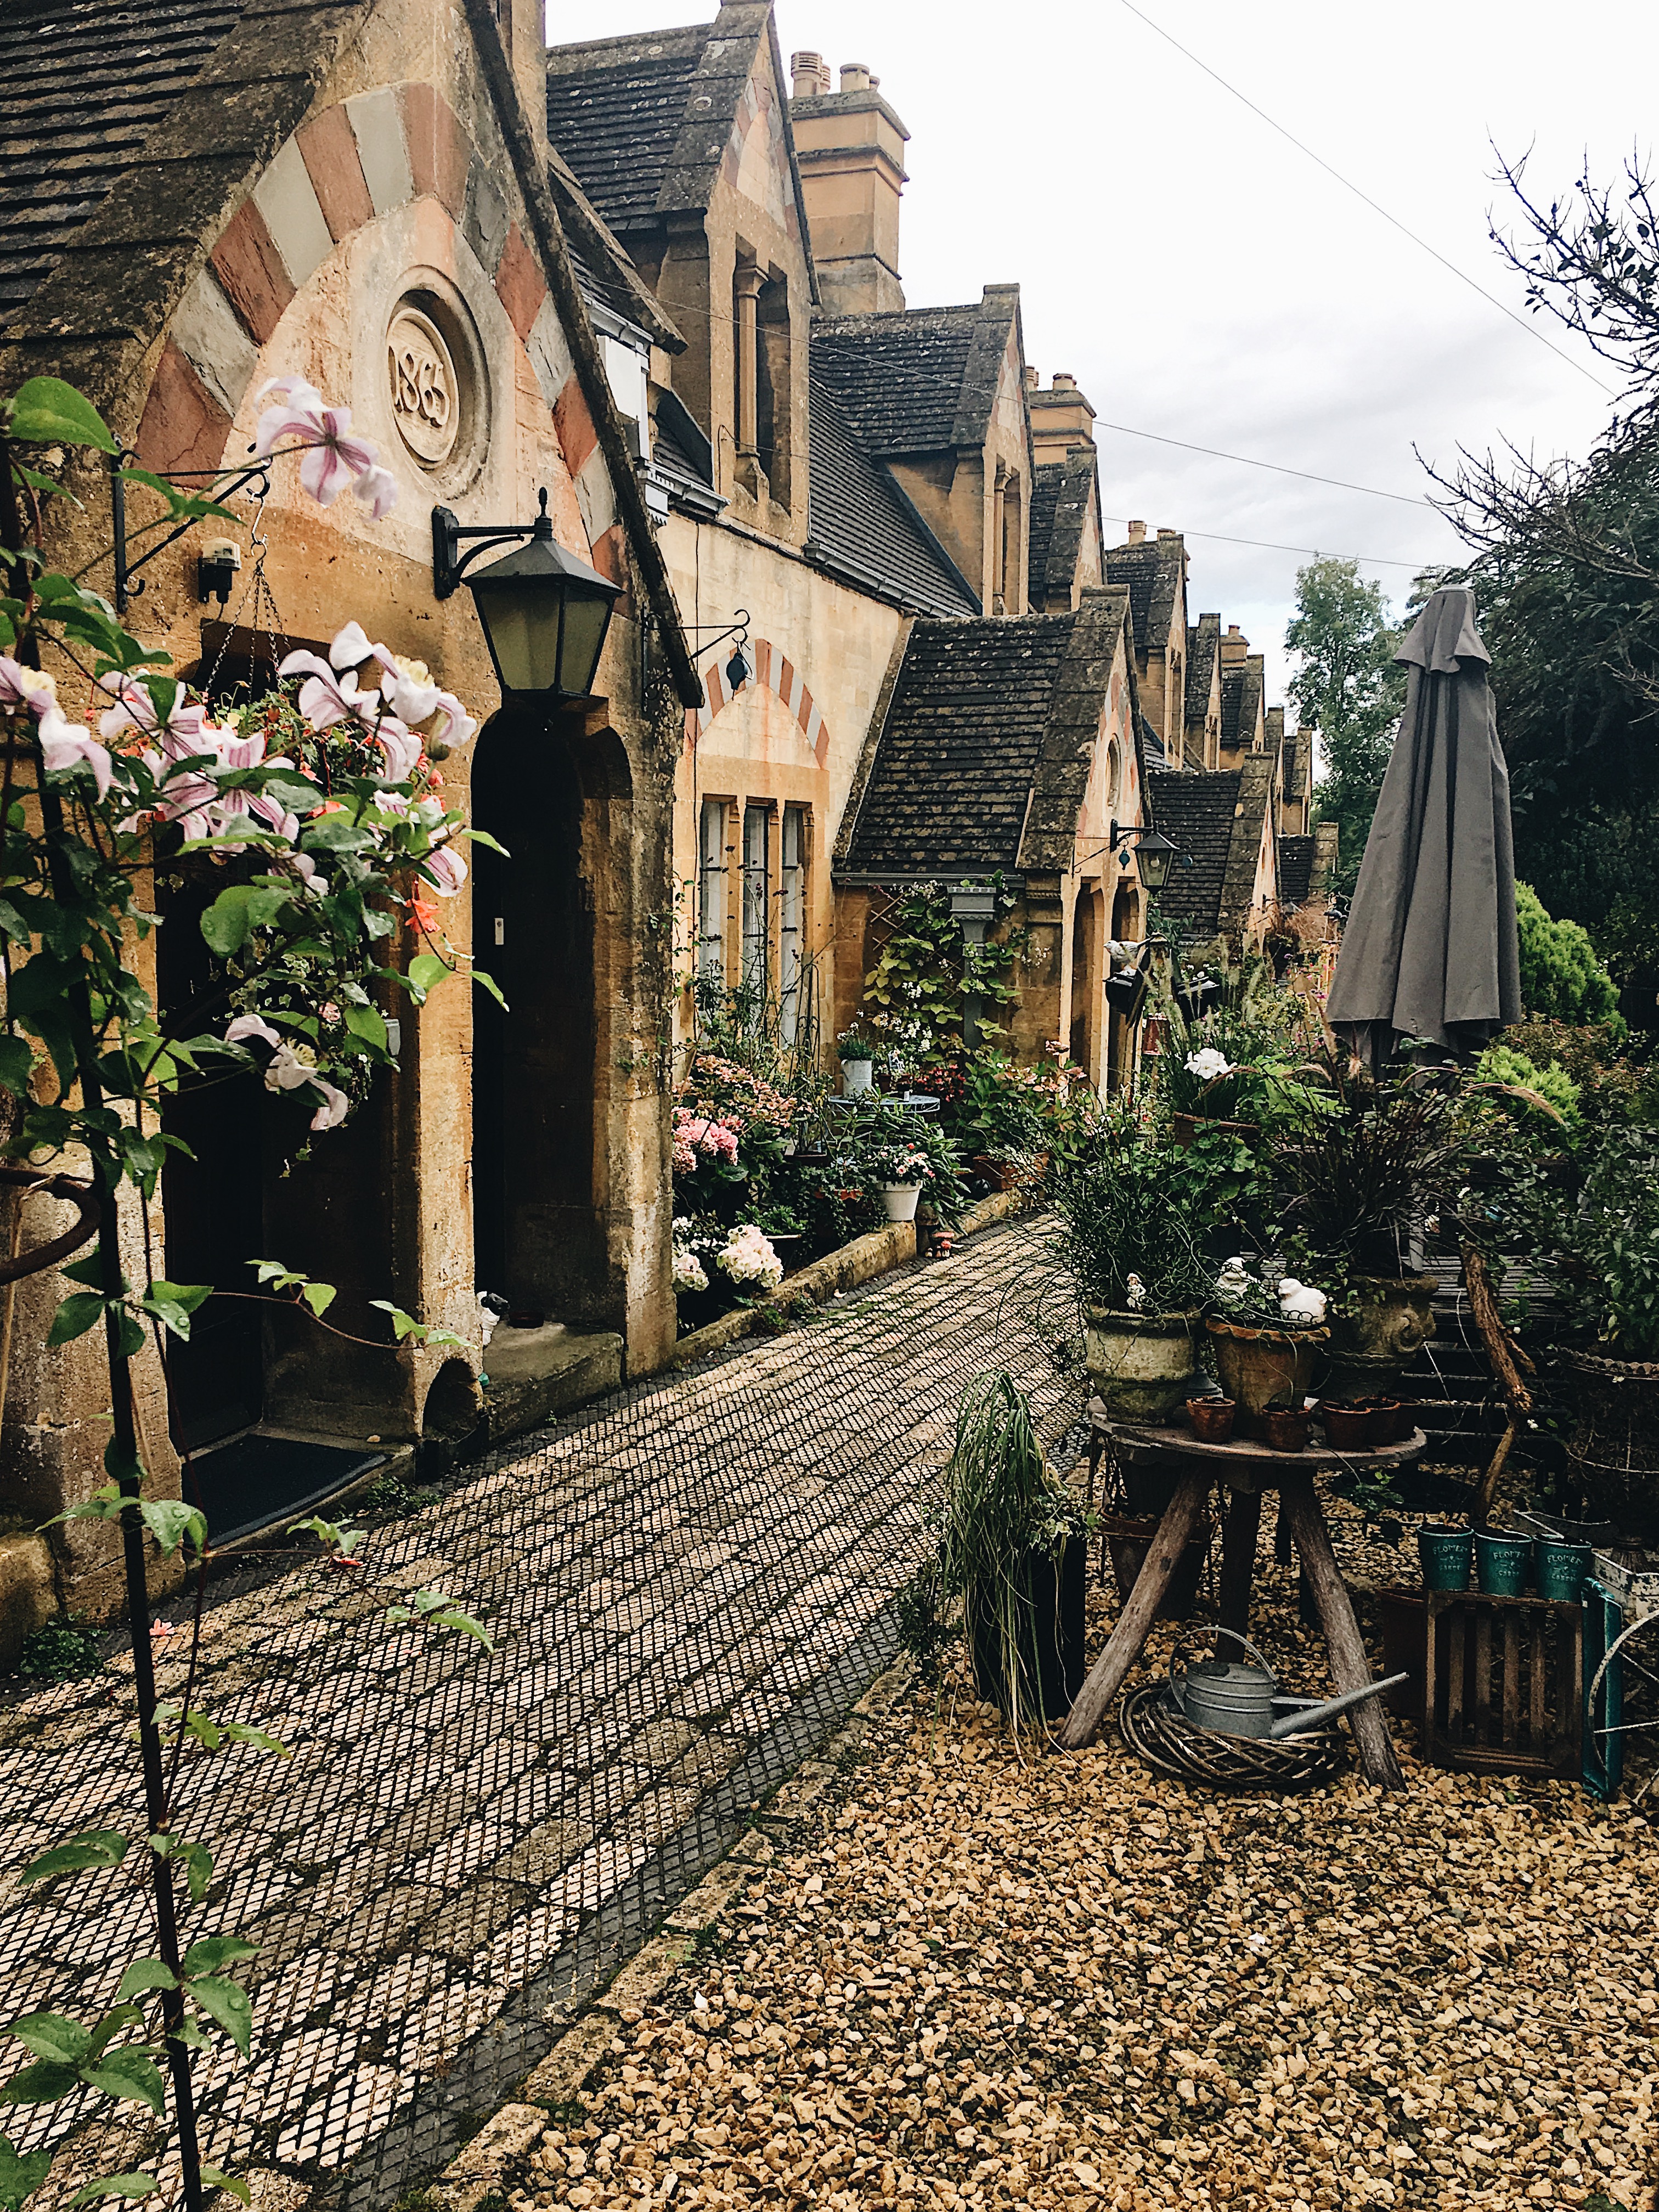 Storybook streets in the Cotswolds